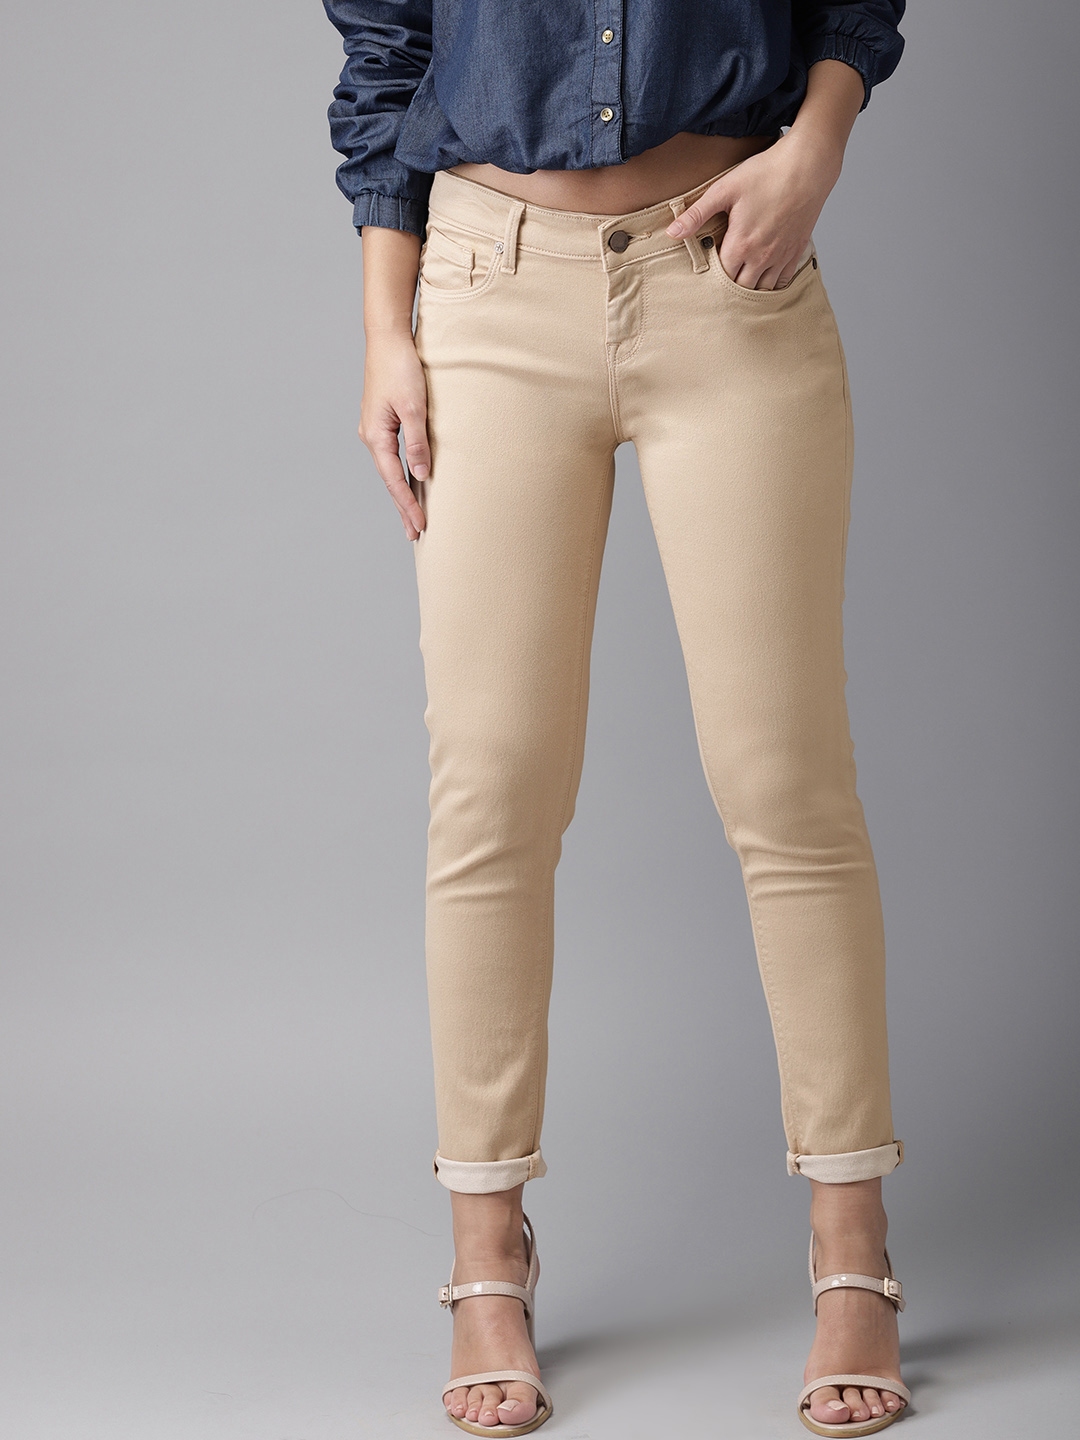 CreamColoured Regular Fit Solid Cropped Cigarette Trousers  Amukti  The  Womens Ethnic Fashion Store